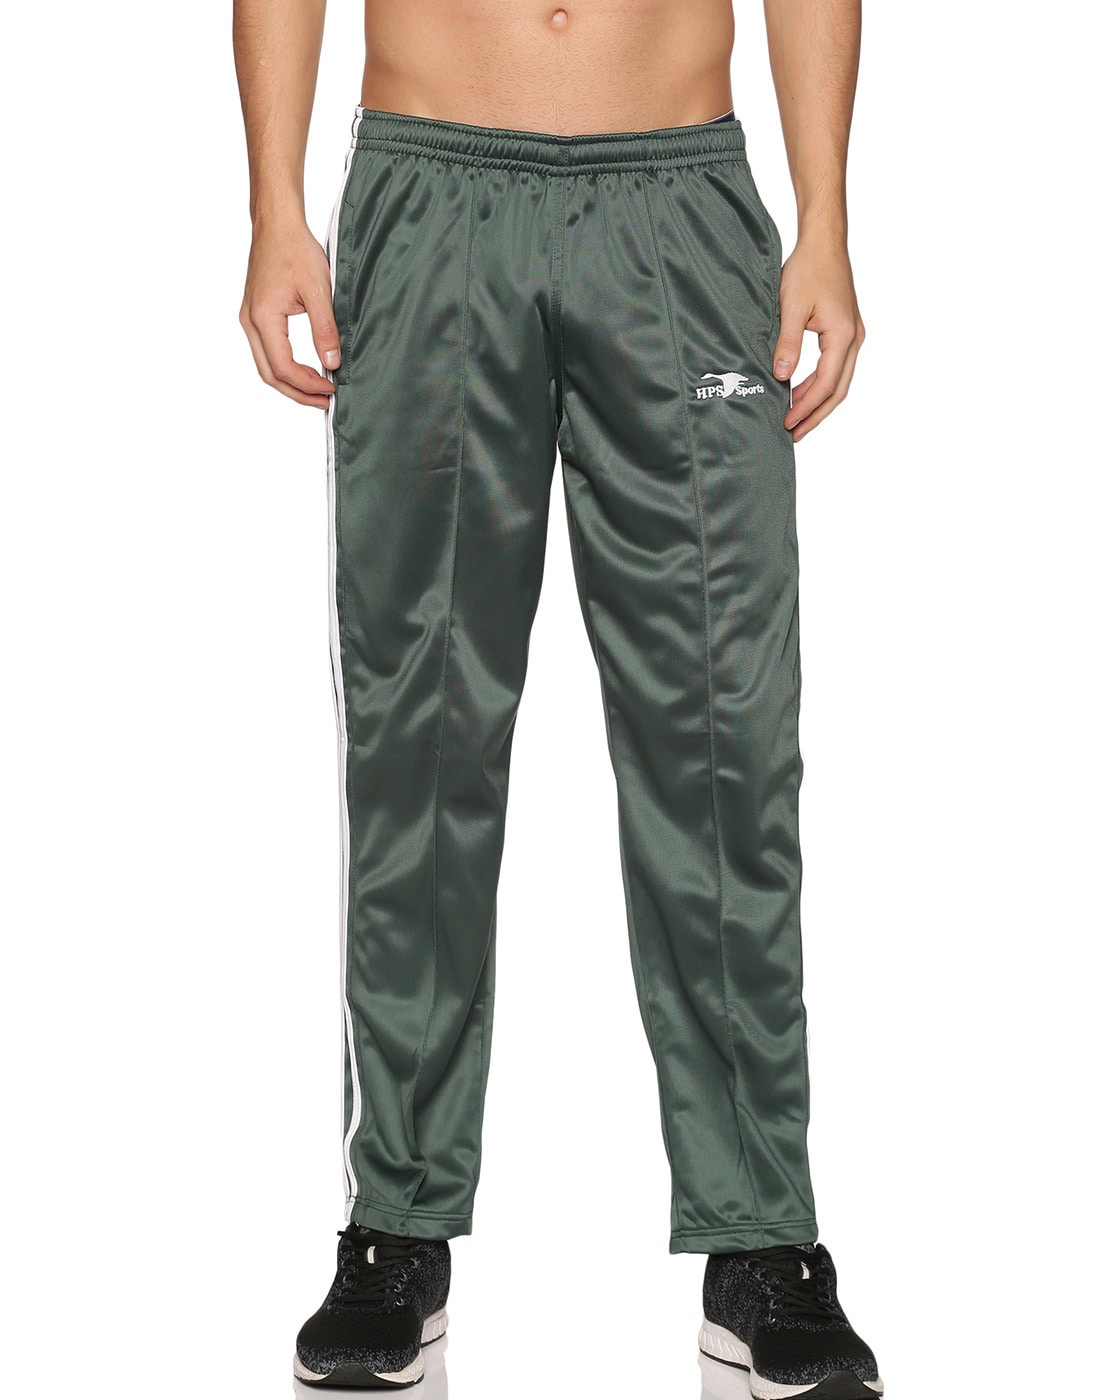 Amazon  Buy Puma Mens Polyester Track Pants for Rs719